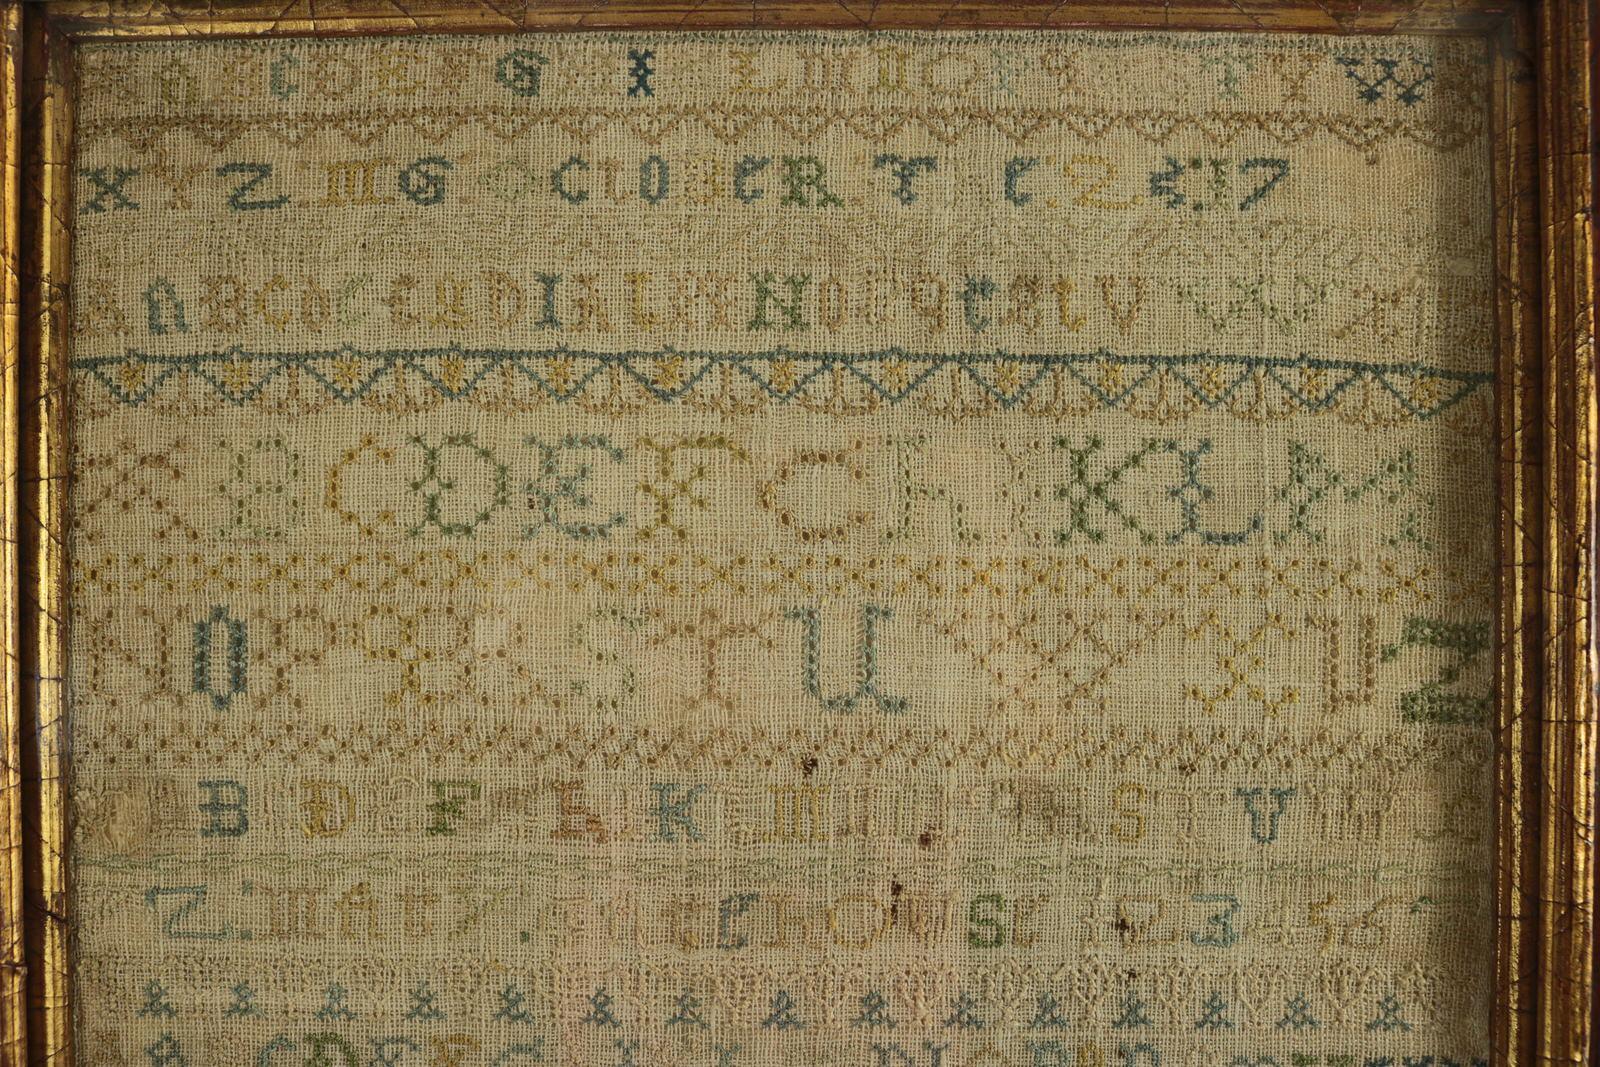 Large Antique Band Sampler, c.1725, by Mary Gatehouse. The sampler is worked in silk on a linen ground, in a variety of stitches. No border, divider lines in various patterns. Colours blue, light brown, green and gold. Alphabets A-Z in upper case